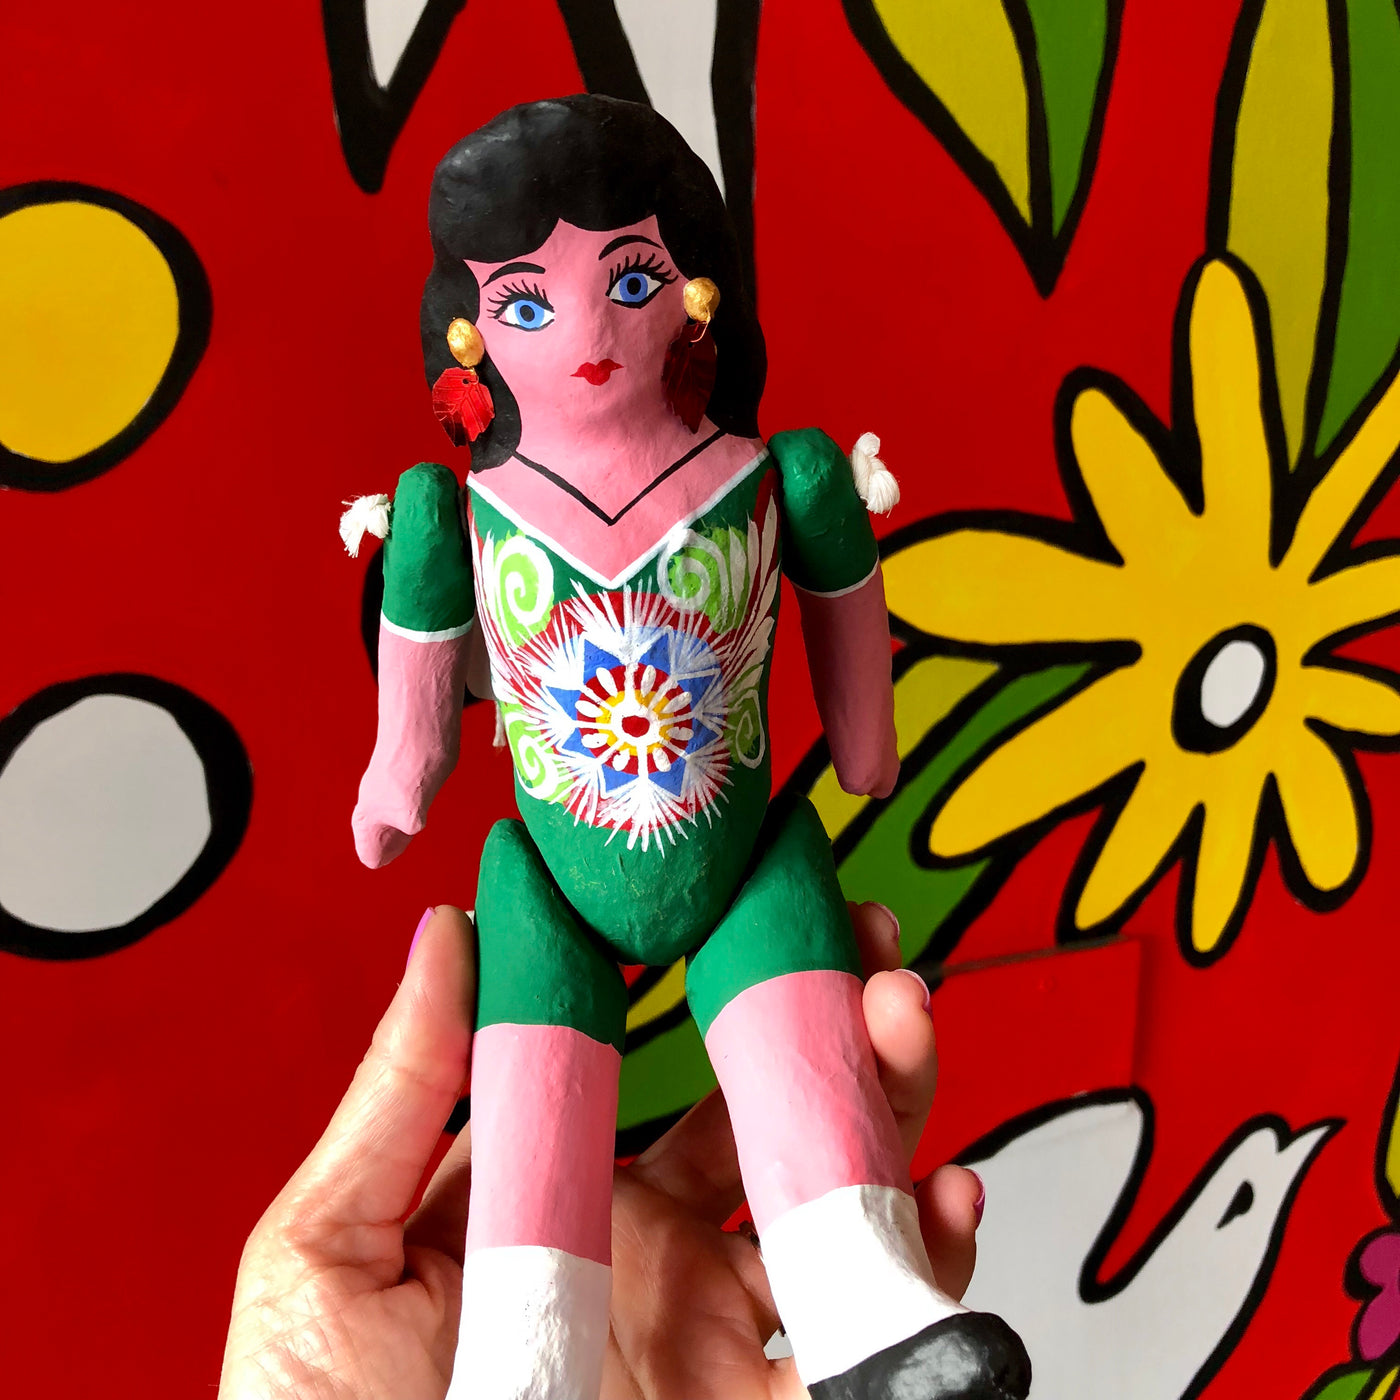 Muñeca de carton doll with moveable arms and legs wearing a green dress.